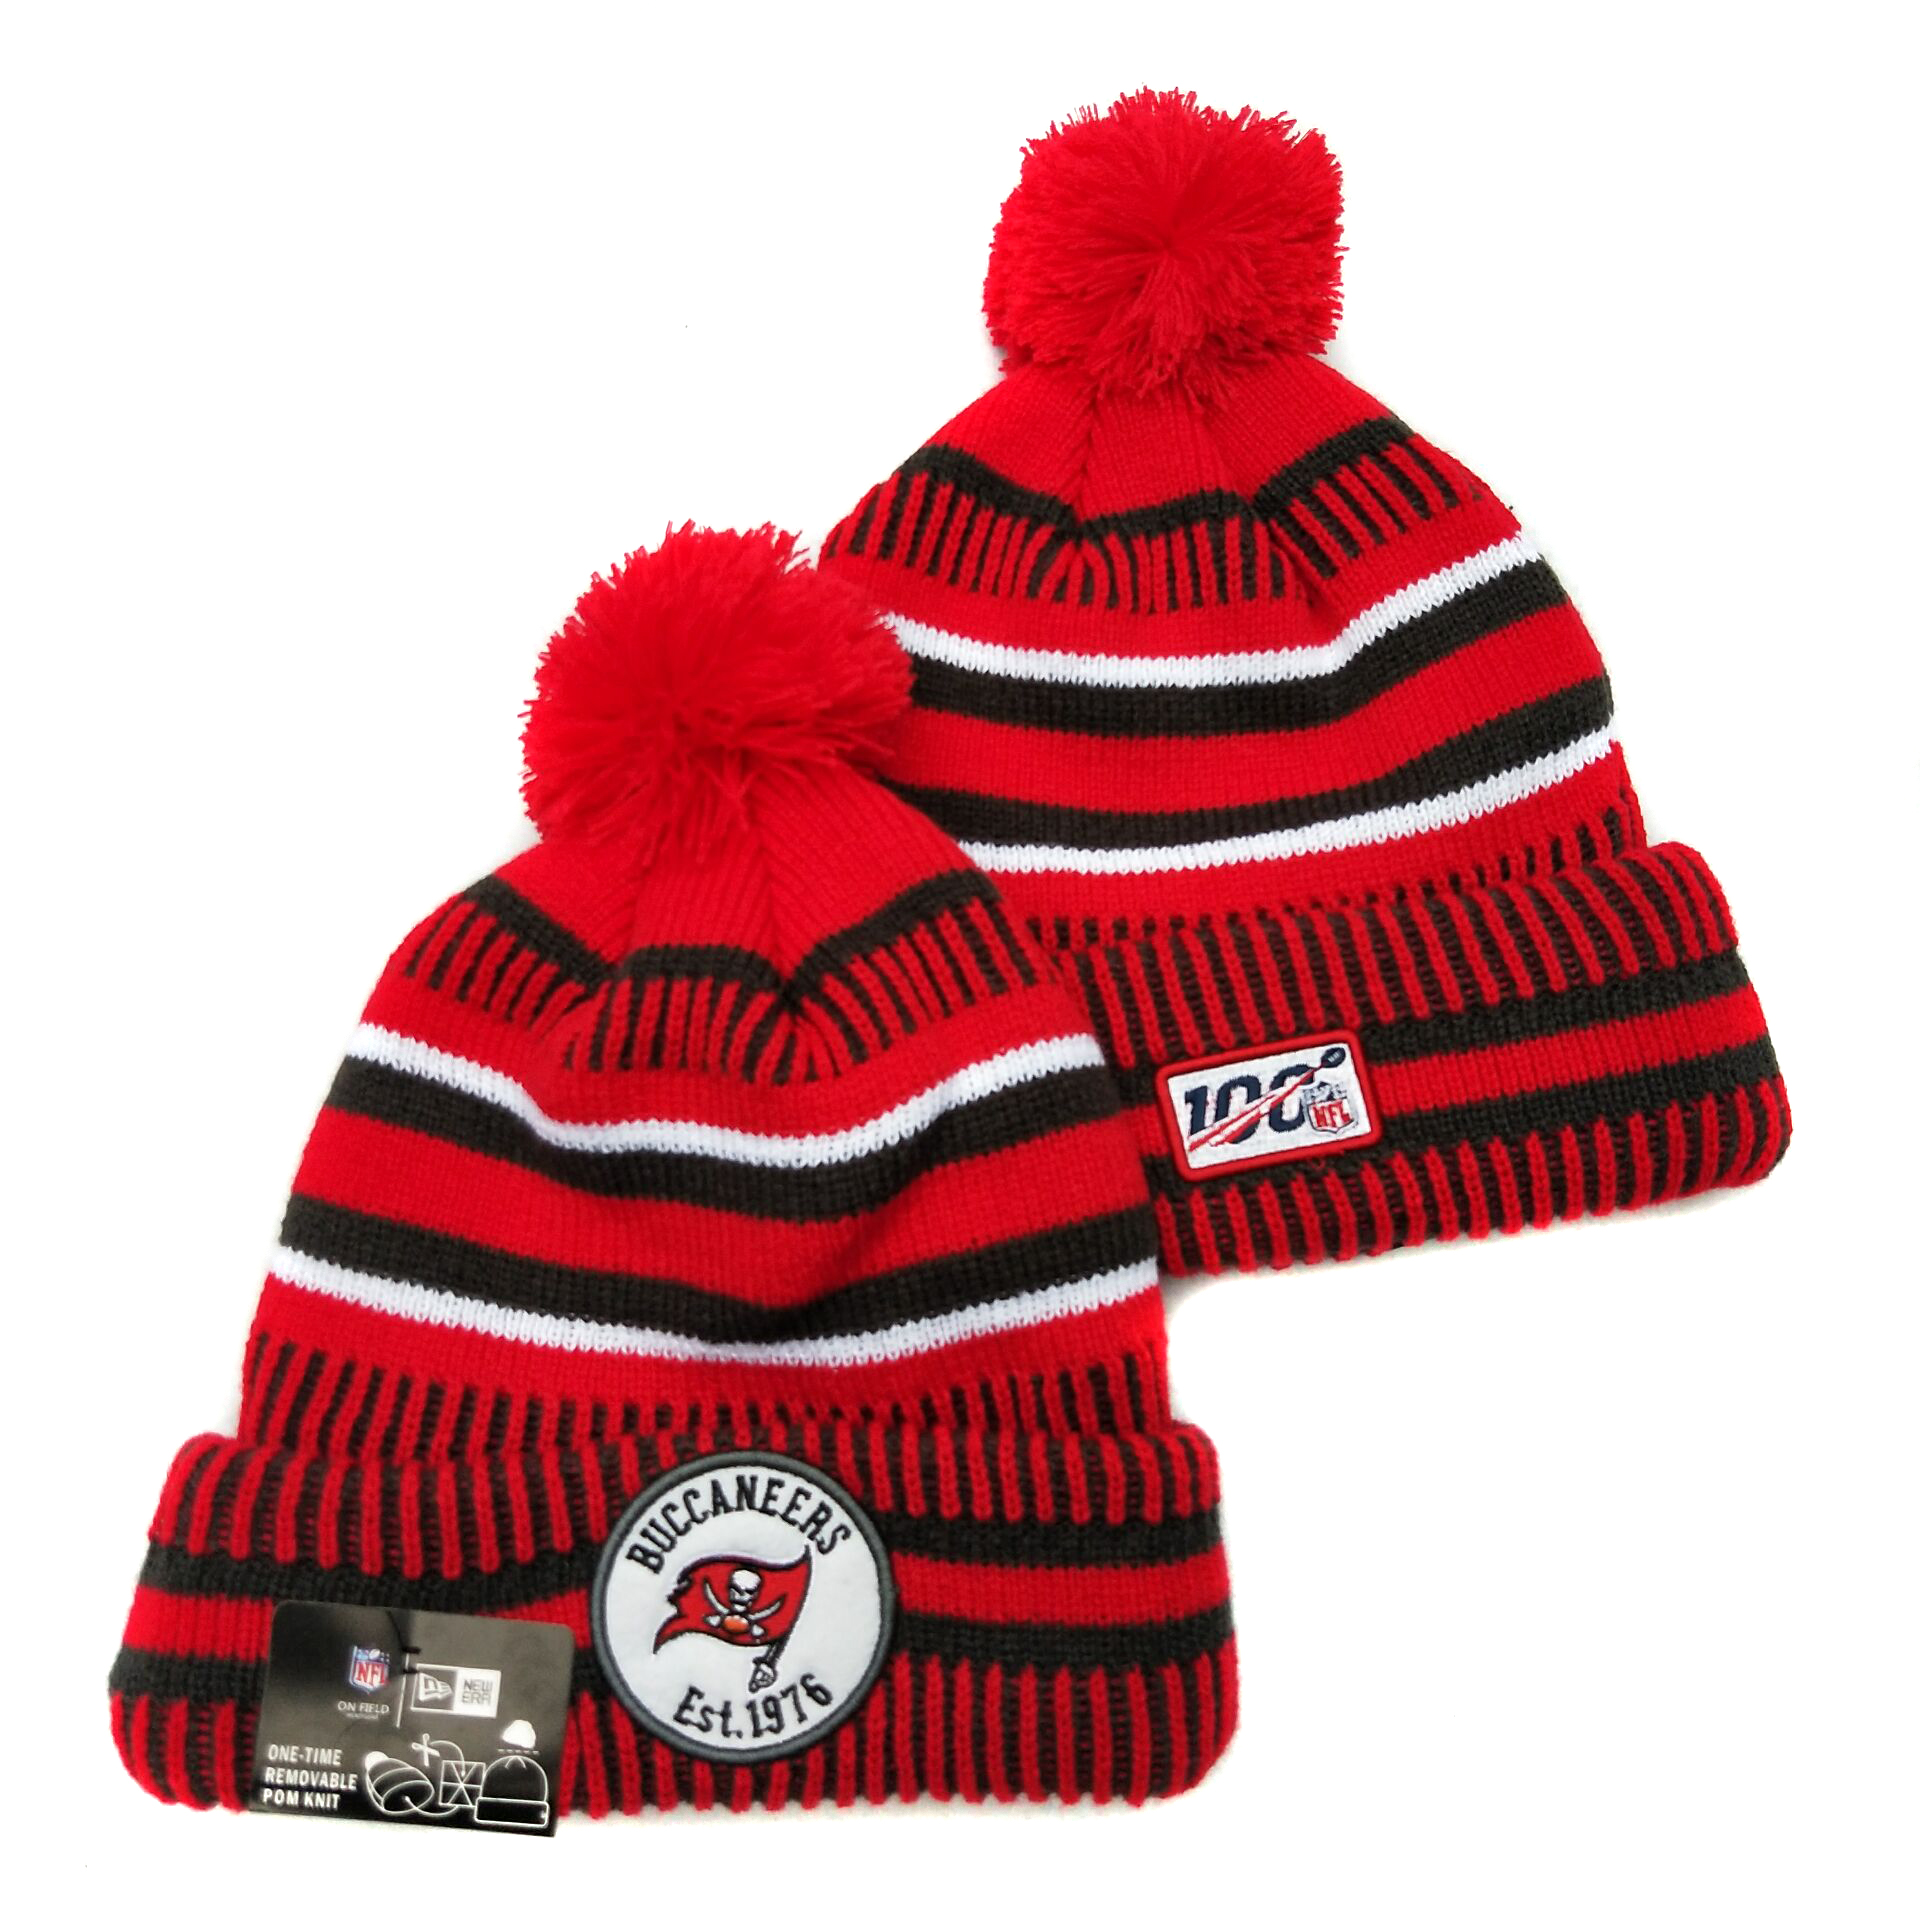 Tampa Bay Buccaneers Knit Hats 027